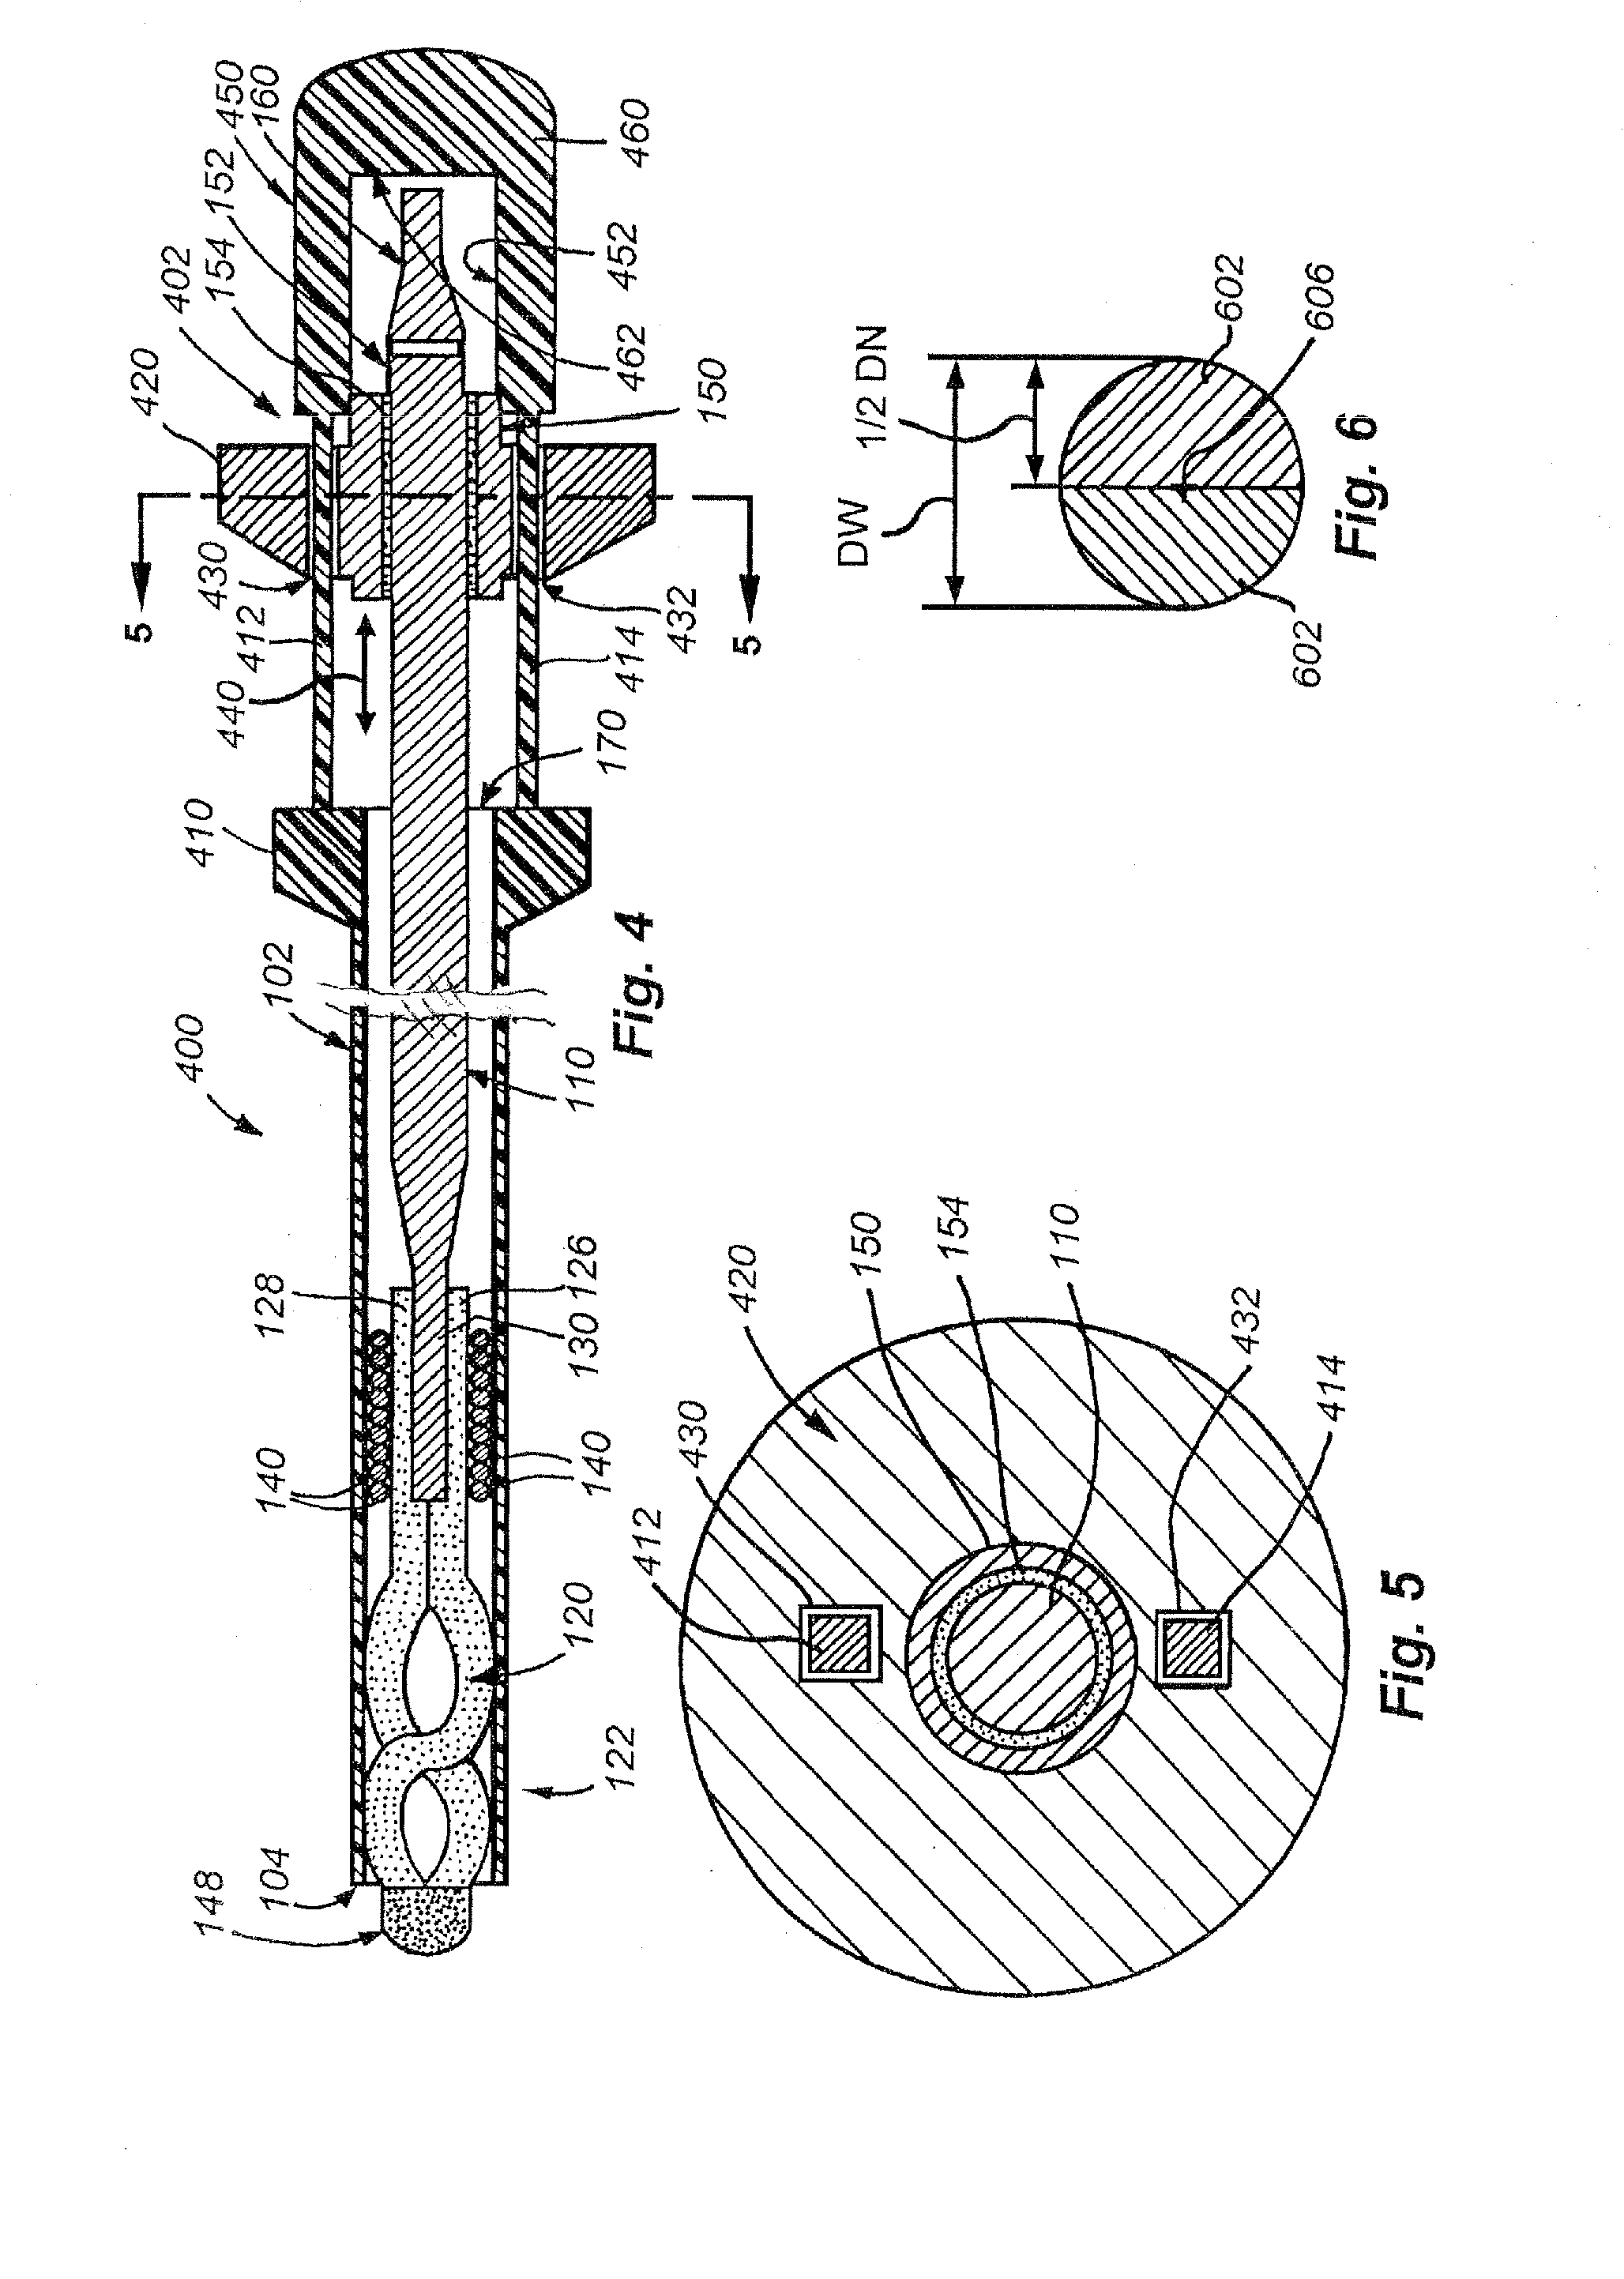 System and method for removal of material from a blood vessel using a small diameter catheter